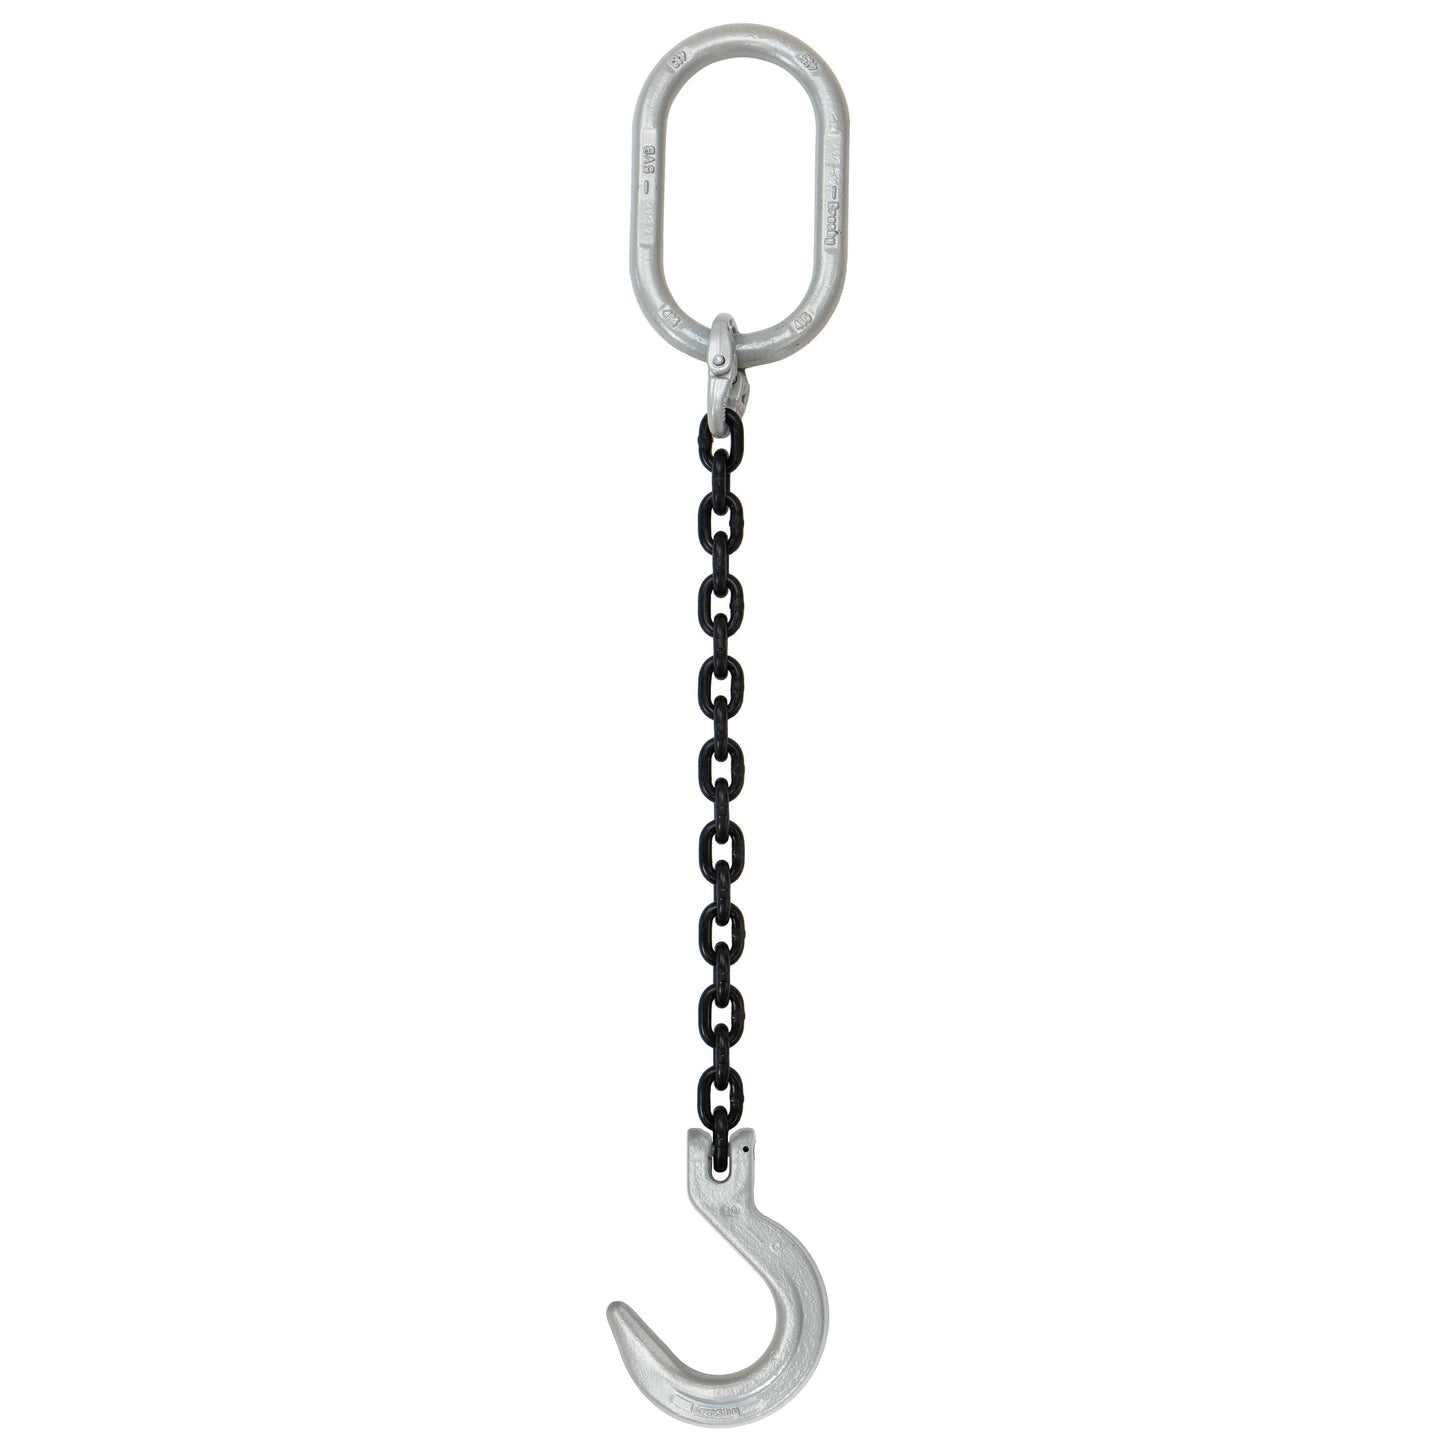 38 inch x 8 foot Domestic Single Leg Chain Sling w Crosby Foundry Hook Grade 100 image 1 of 2